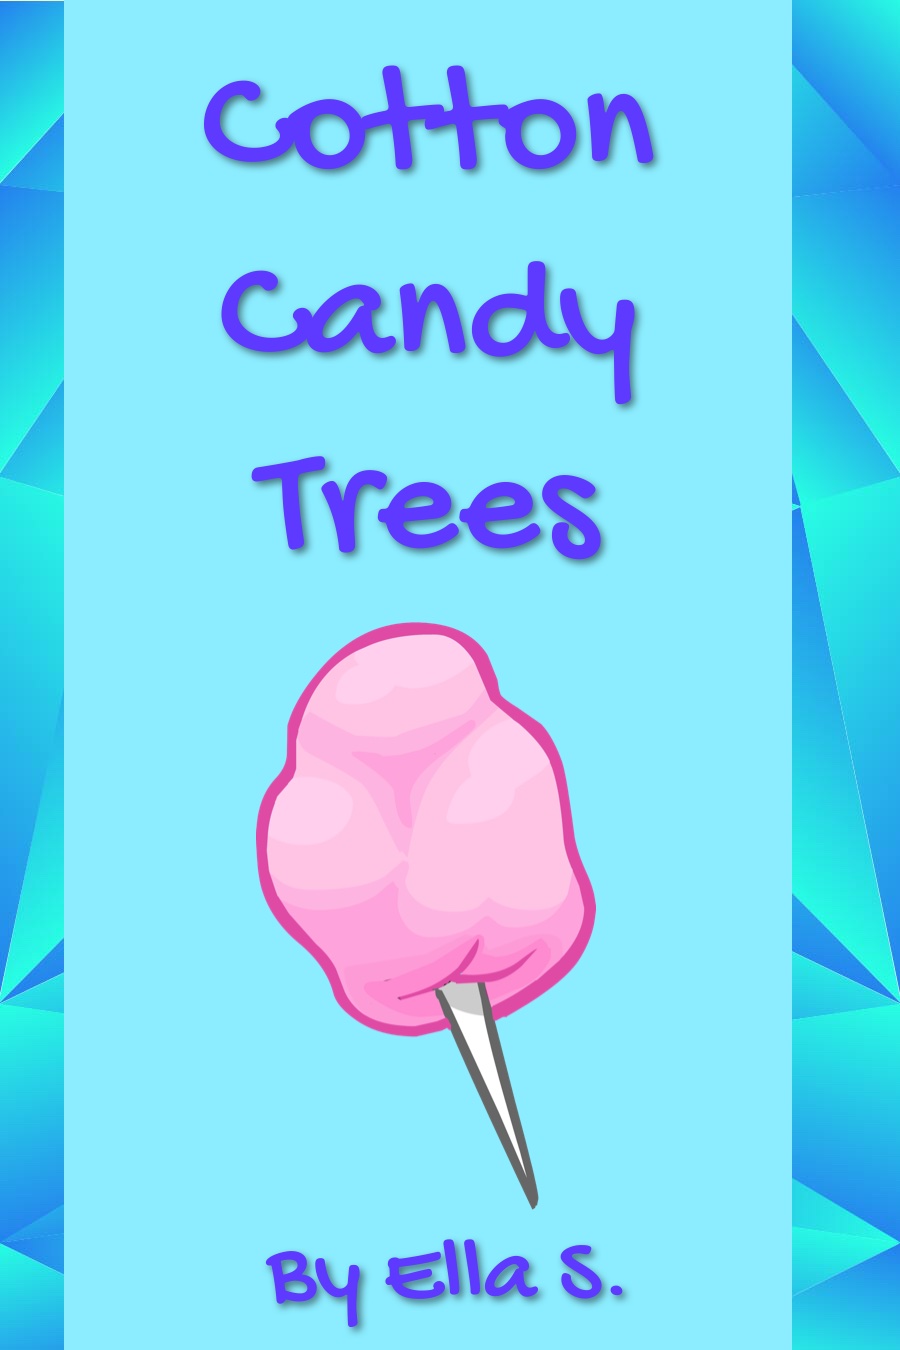 Cotton Candy Trees by Ella S